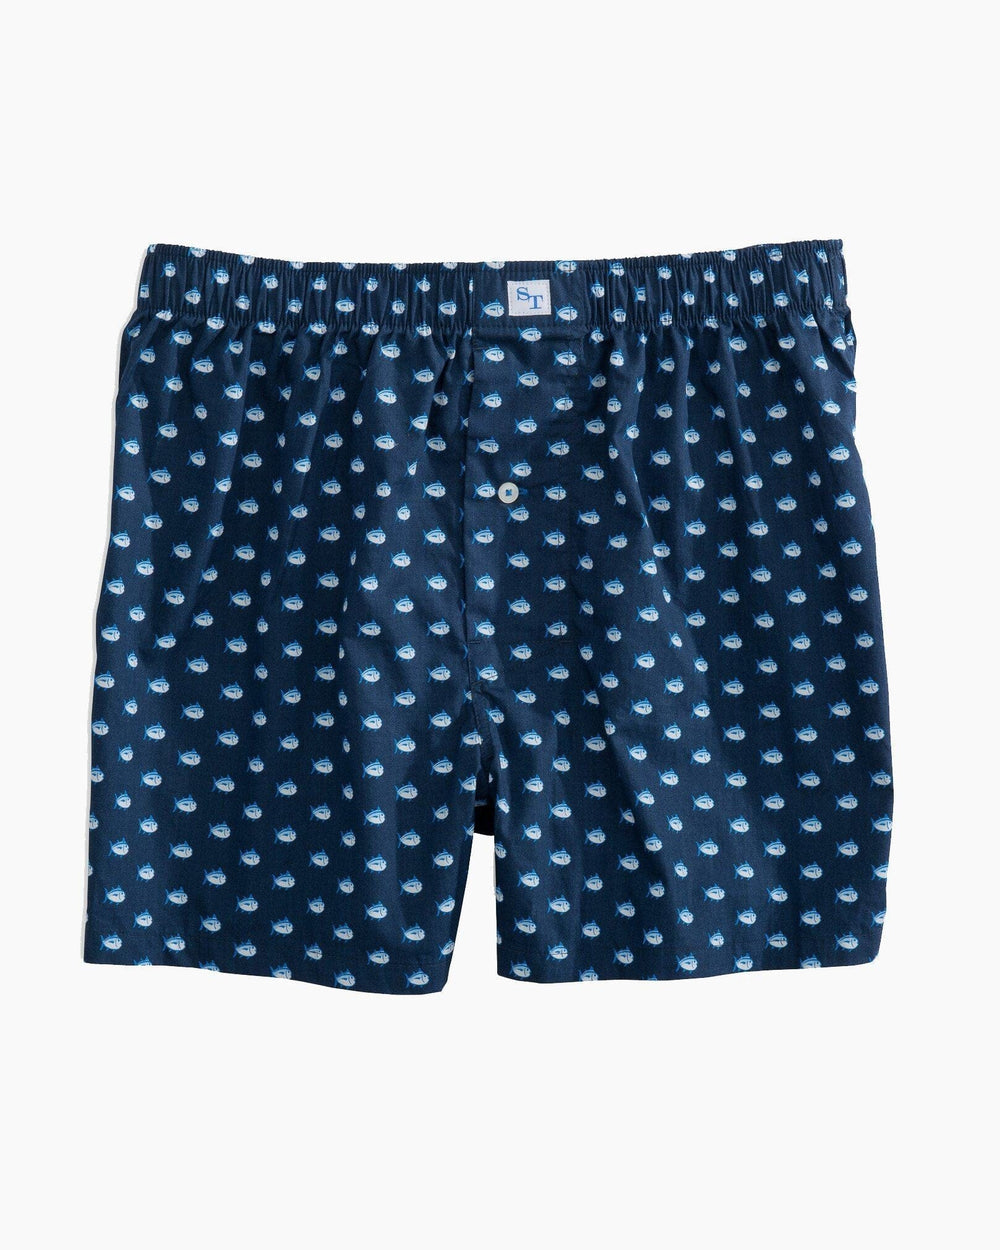 The front view of the Men's Navy Skipjack Boxer Shorts by Southern Tide - True Navy